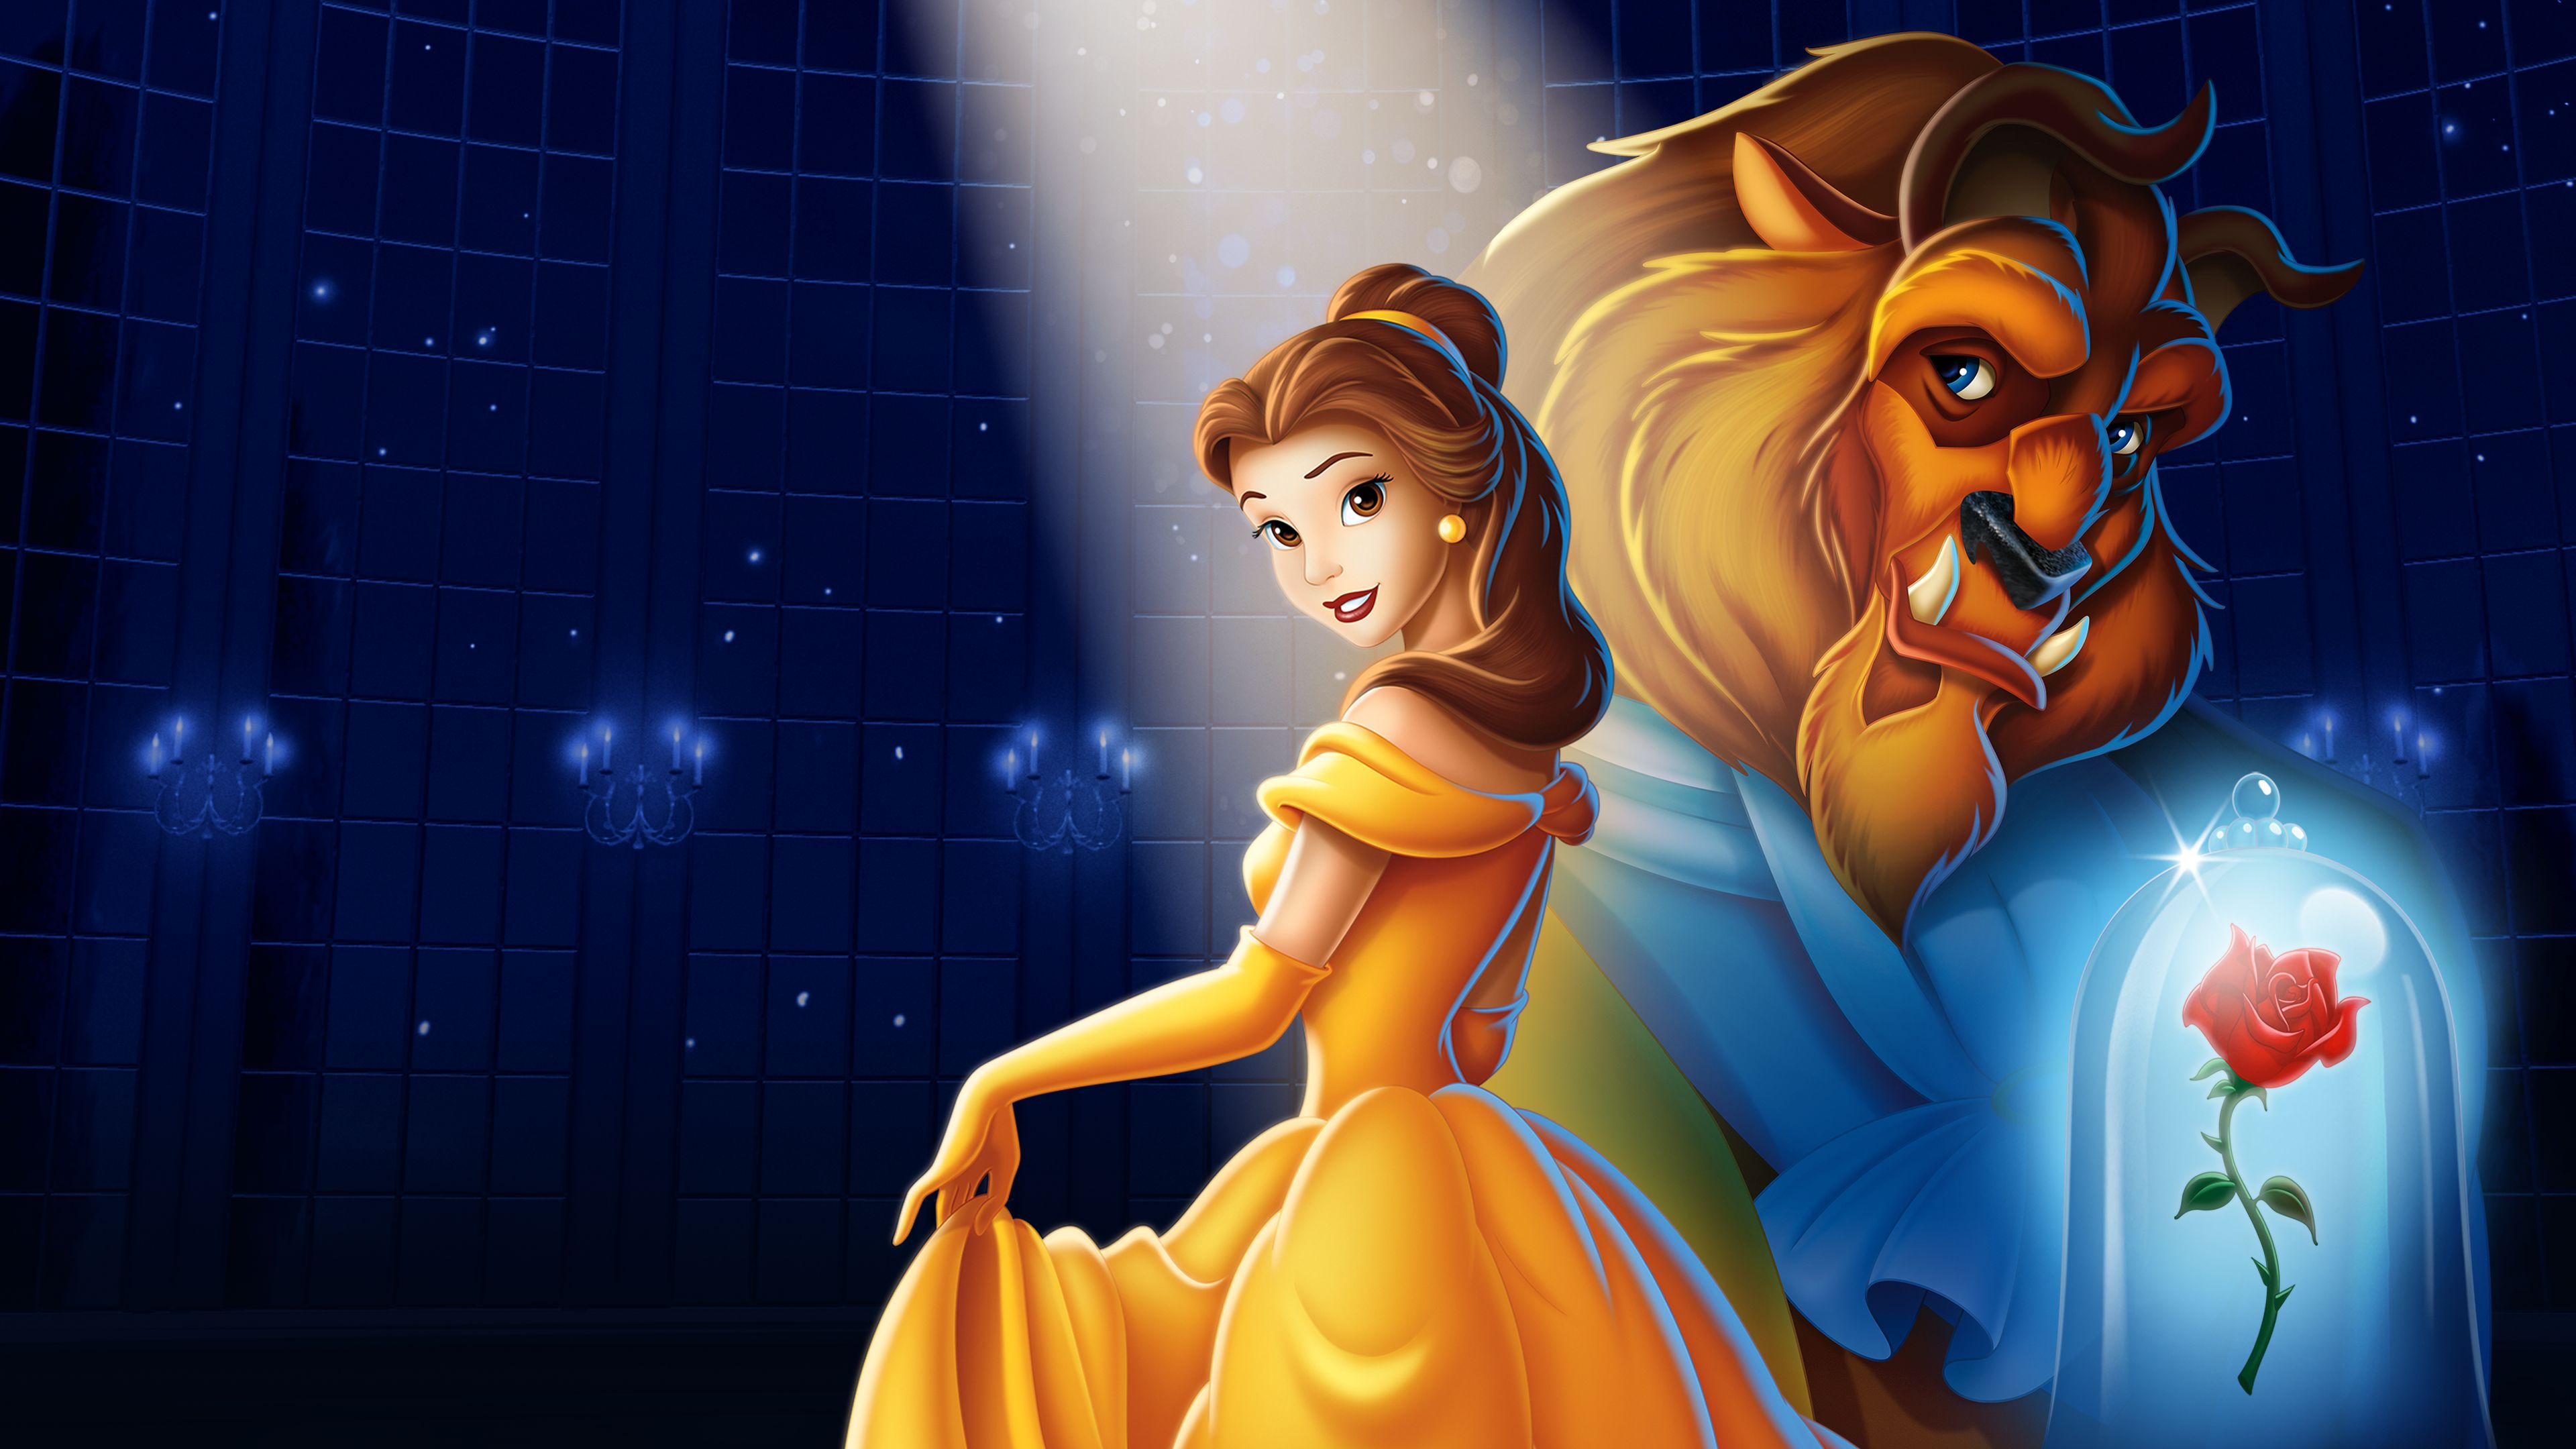 Ð�Ð¾Ð²Ð¾Ñ�Ñ‚Ð¸ Ð¿Ð¾ Ñ‚ÐµÐ¼Ðµ "ÐšÑ€Ð°Ñ�Ð°Ð²Ð¸Ñ†Ð° Ð¸ Ñ‡ÑƒÐ´Ð¾Ð²Ð¸Ñ‰Ðµ" /Beauty and the Beast/ (19...